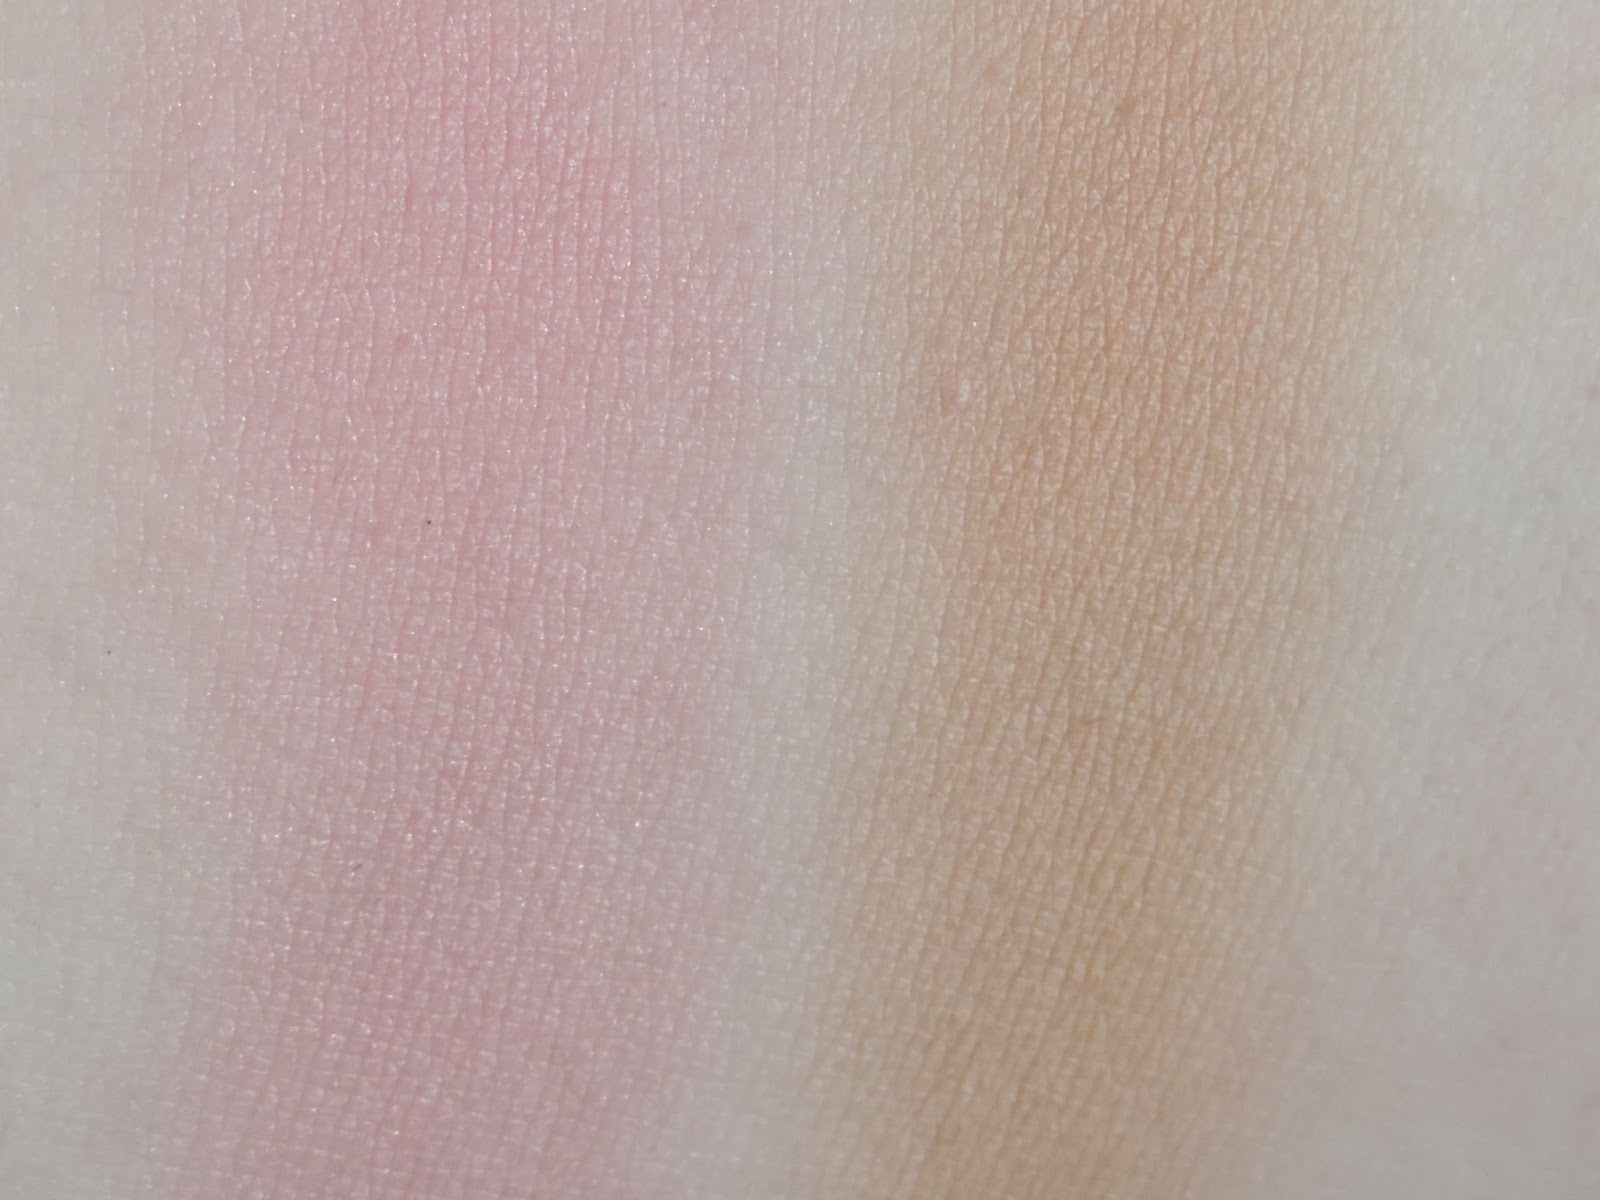 Swatches of Becca Mineral Blushes (blended out) Flowerchild,Wild Honey